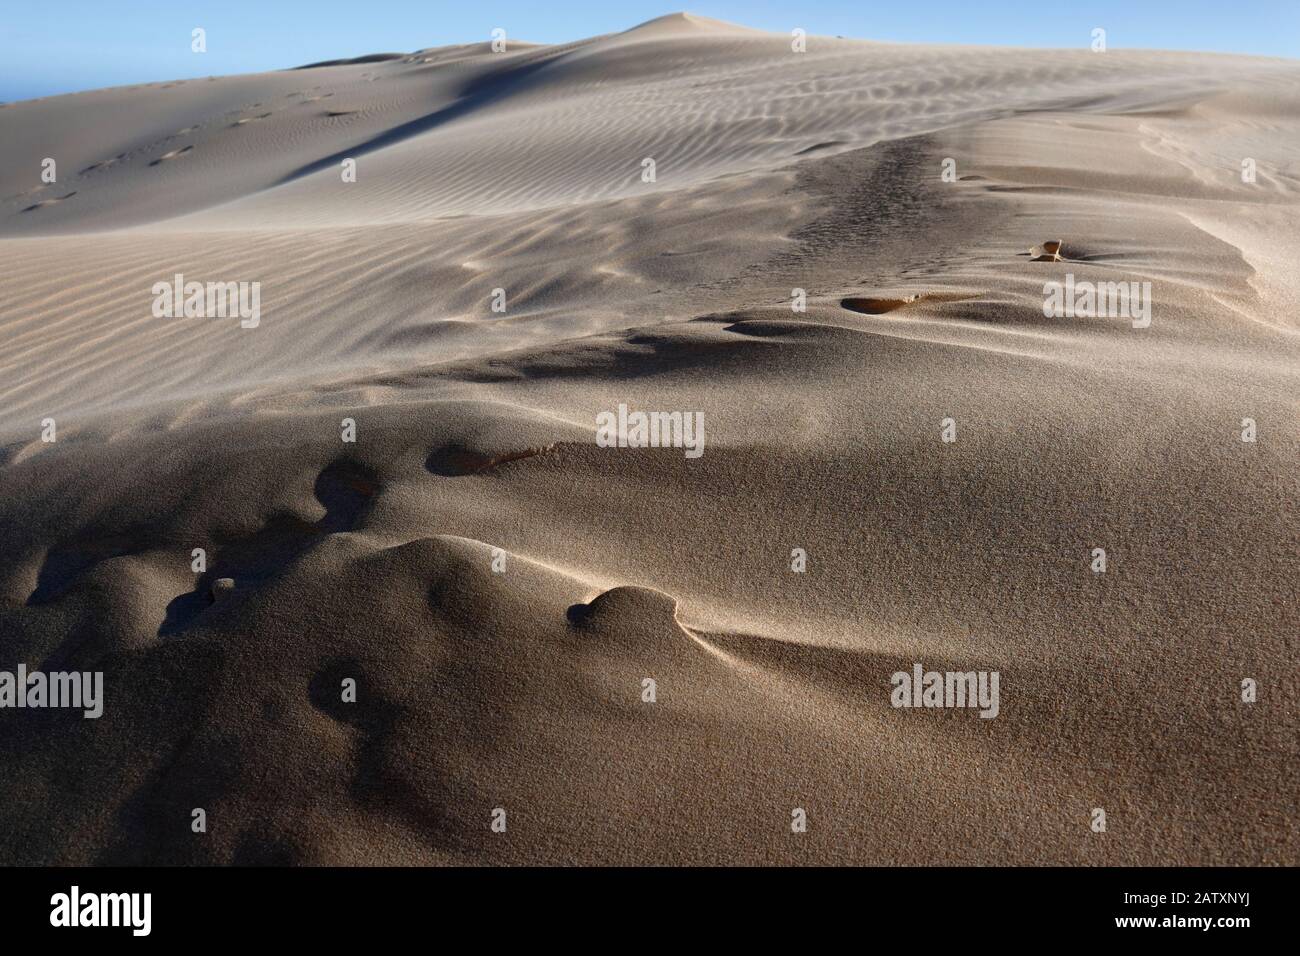 Sand ripples and wind sculptured patterns, shapes and textures in the towering sand dunes of Sardinia Bay, Port Elizabeth, Eastern Cape, South Africa Stock Photo